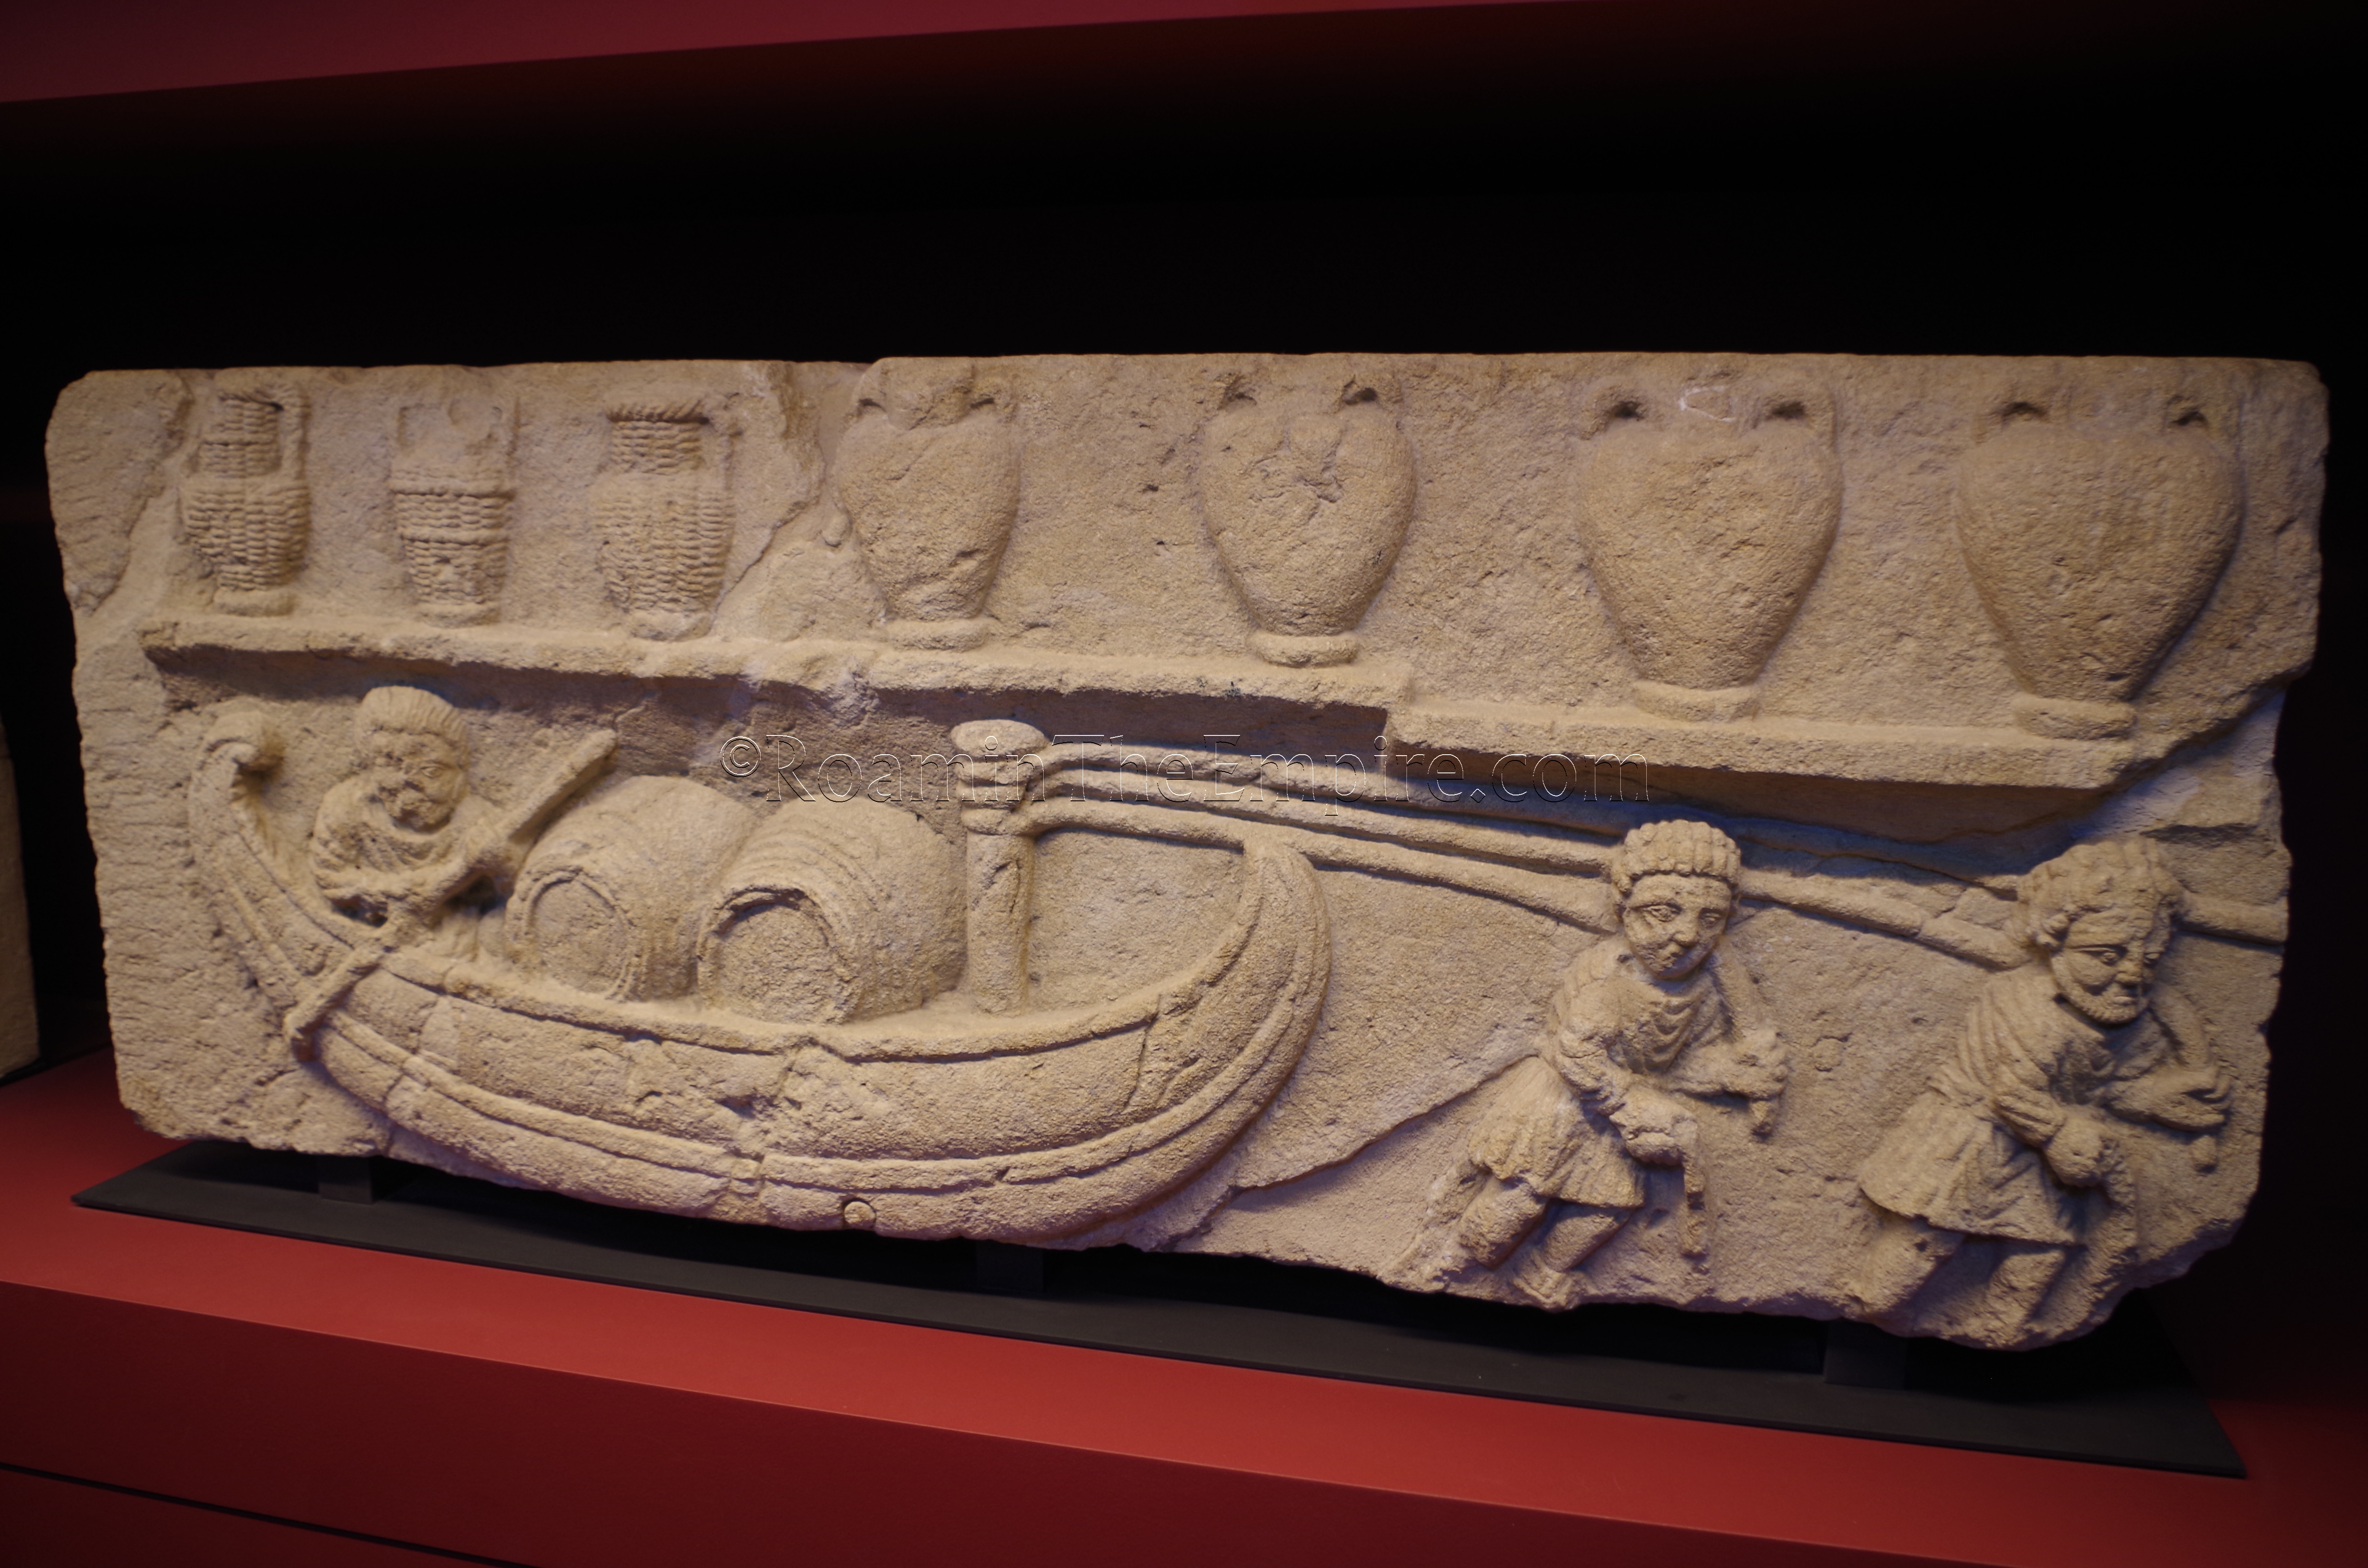 Fragment of a funerary monument depicting a barge being hauled, displayed in the Musée Lapidaire. Avennio. Avignon.